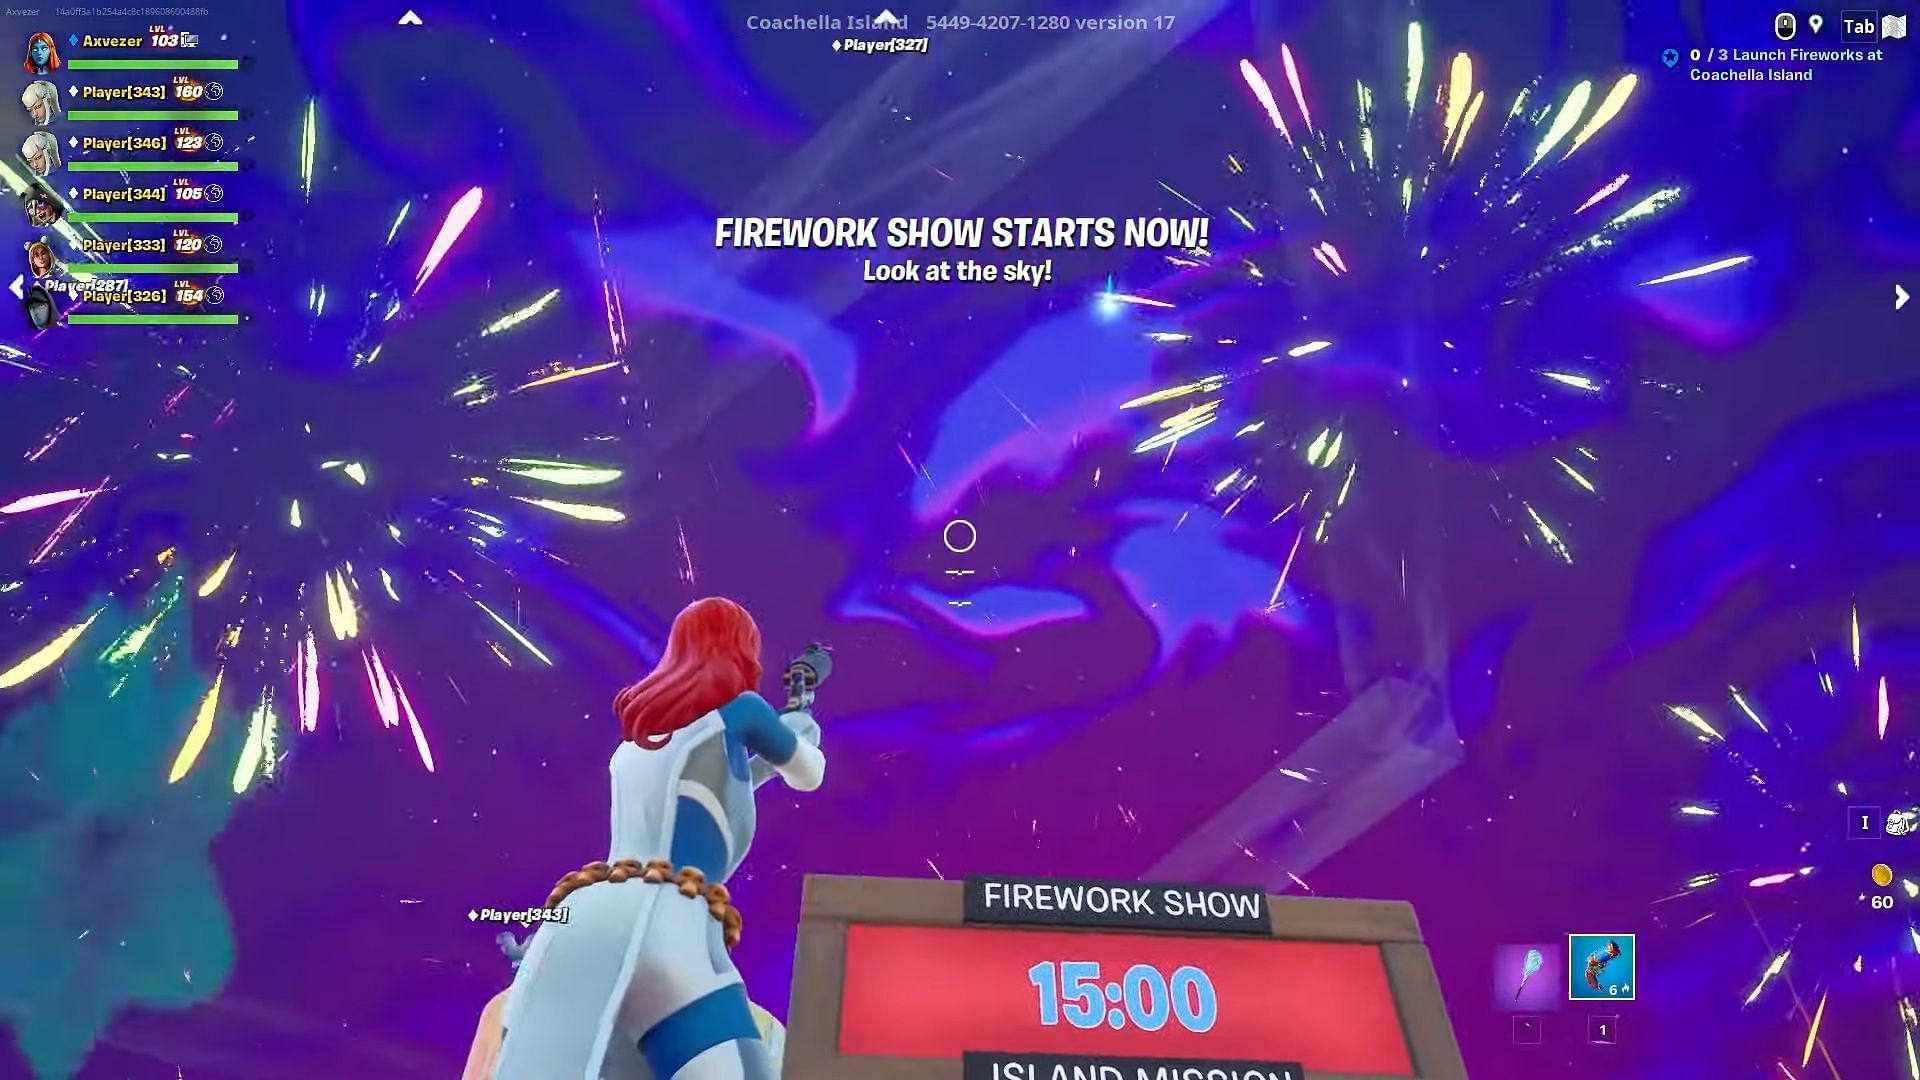 To launch fireworks at the Coachella island, use the Flare Gun (Image via Epic Games)